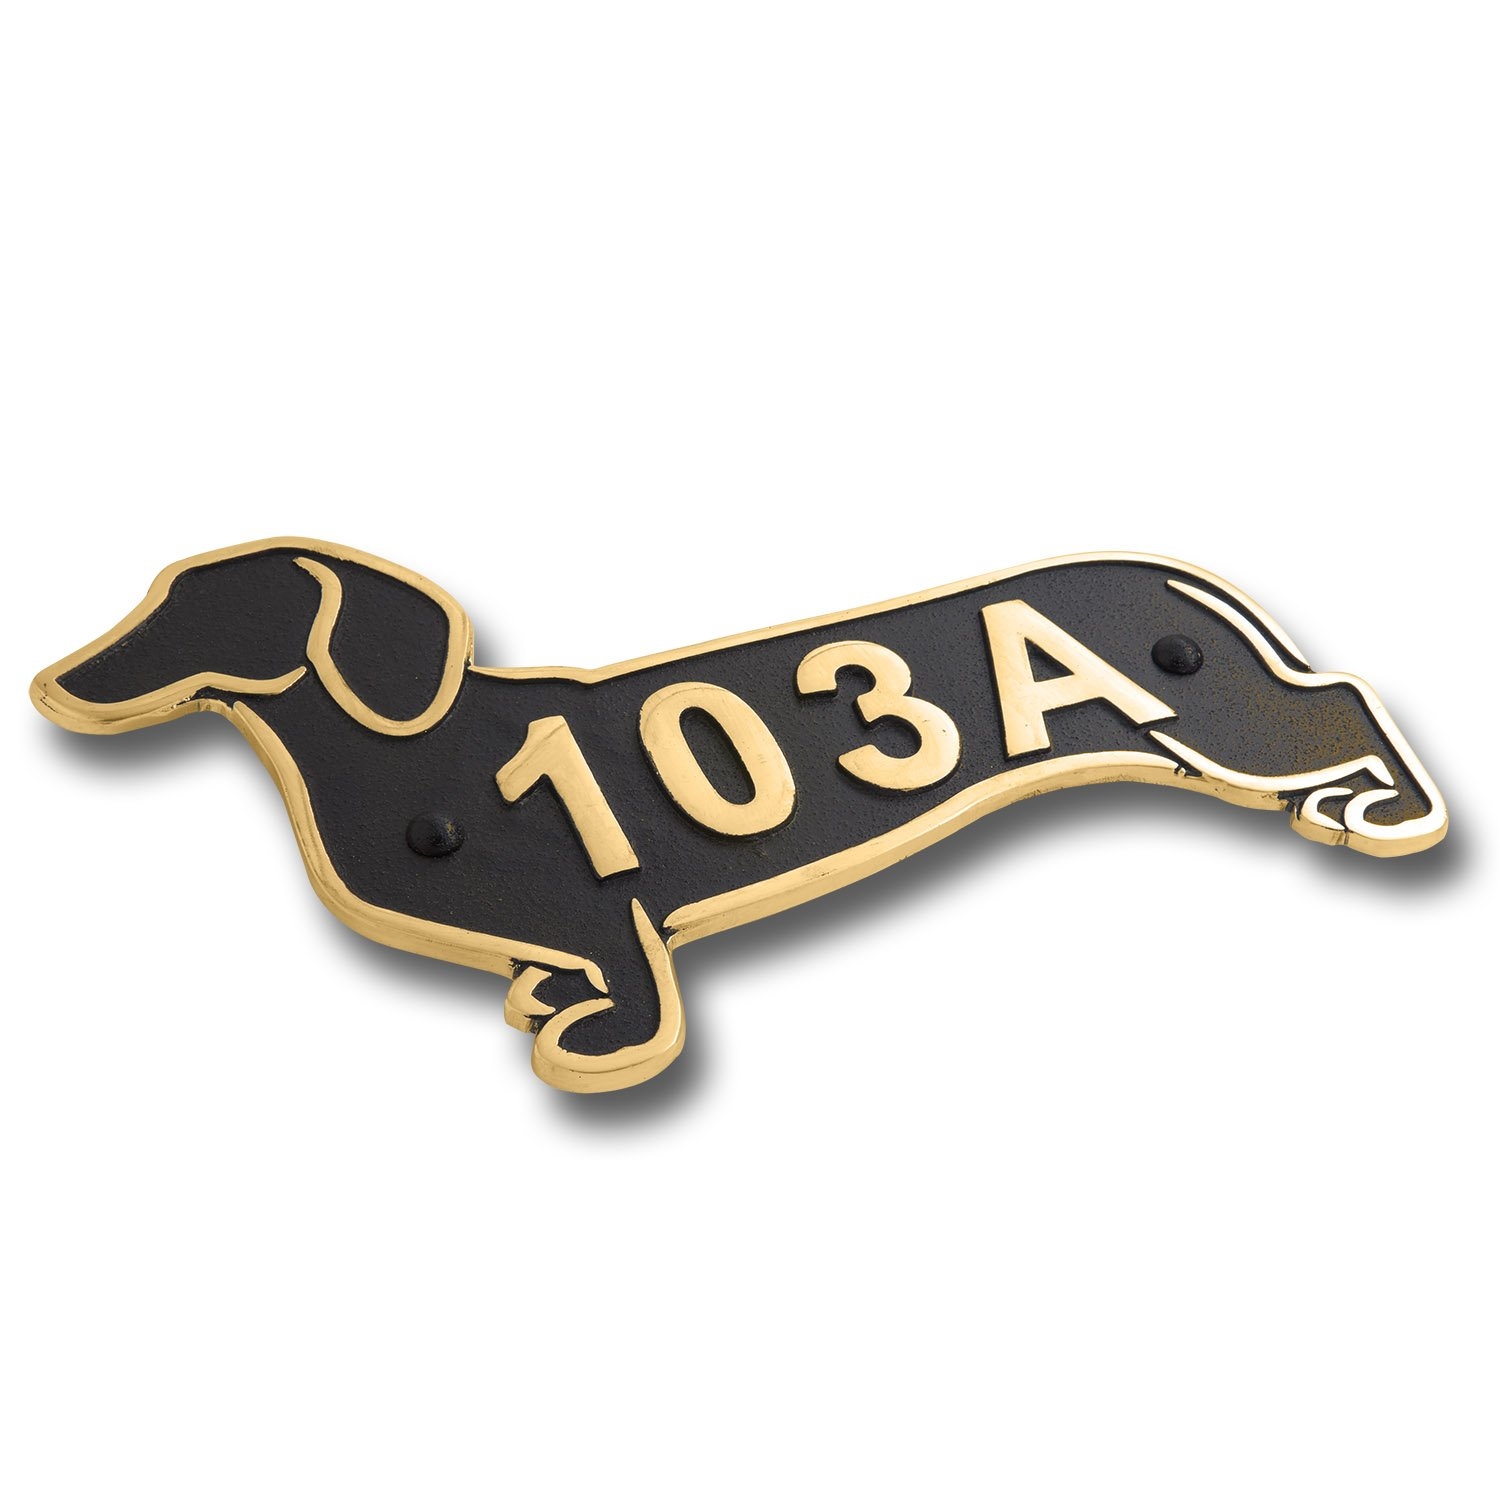 Dachshund Metal House Number Address Plaque. Sausage Dog Gift Idea For A Dachshund Owner. Yard Or Garden Dachshund Décor Makes A Great Gift For Him Or Her – Brass & Green